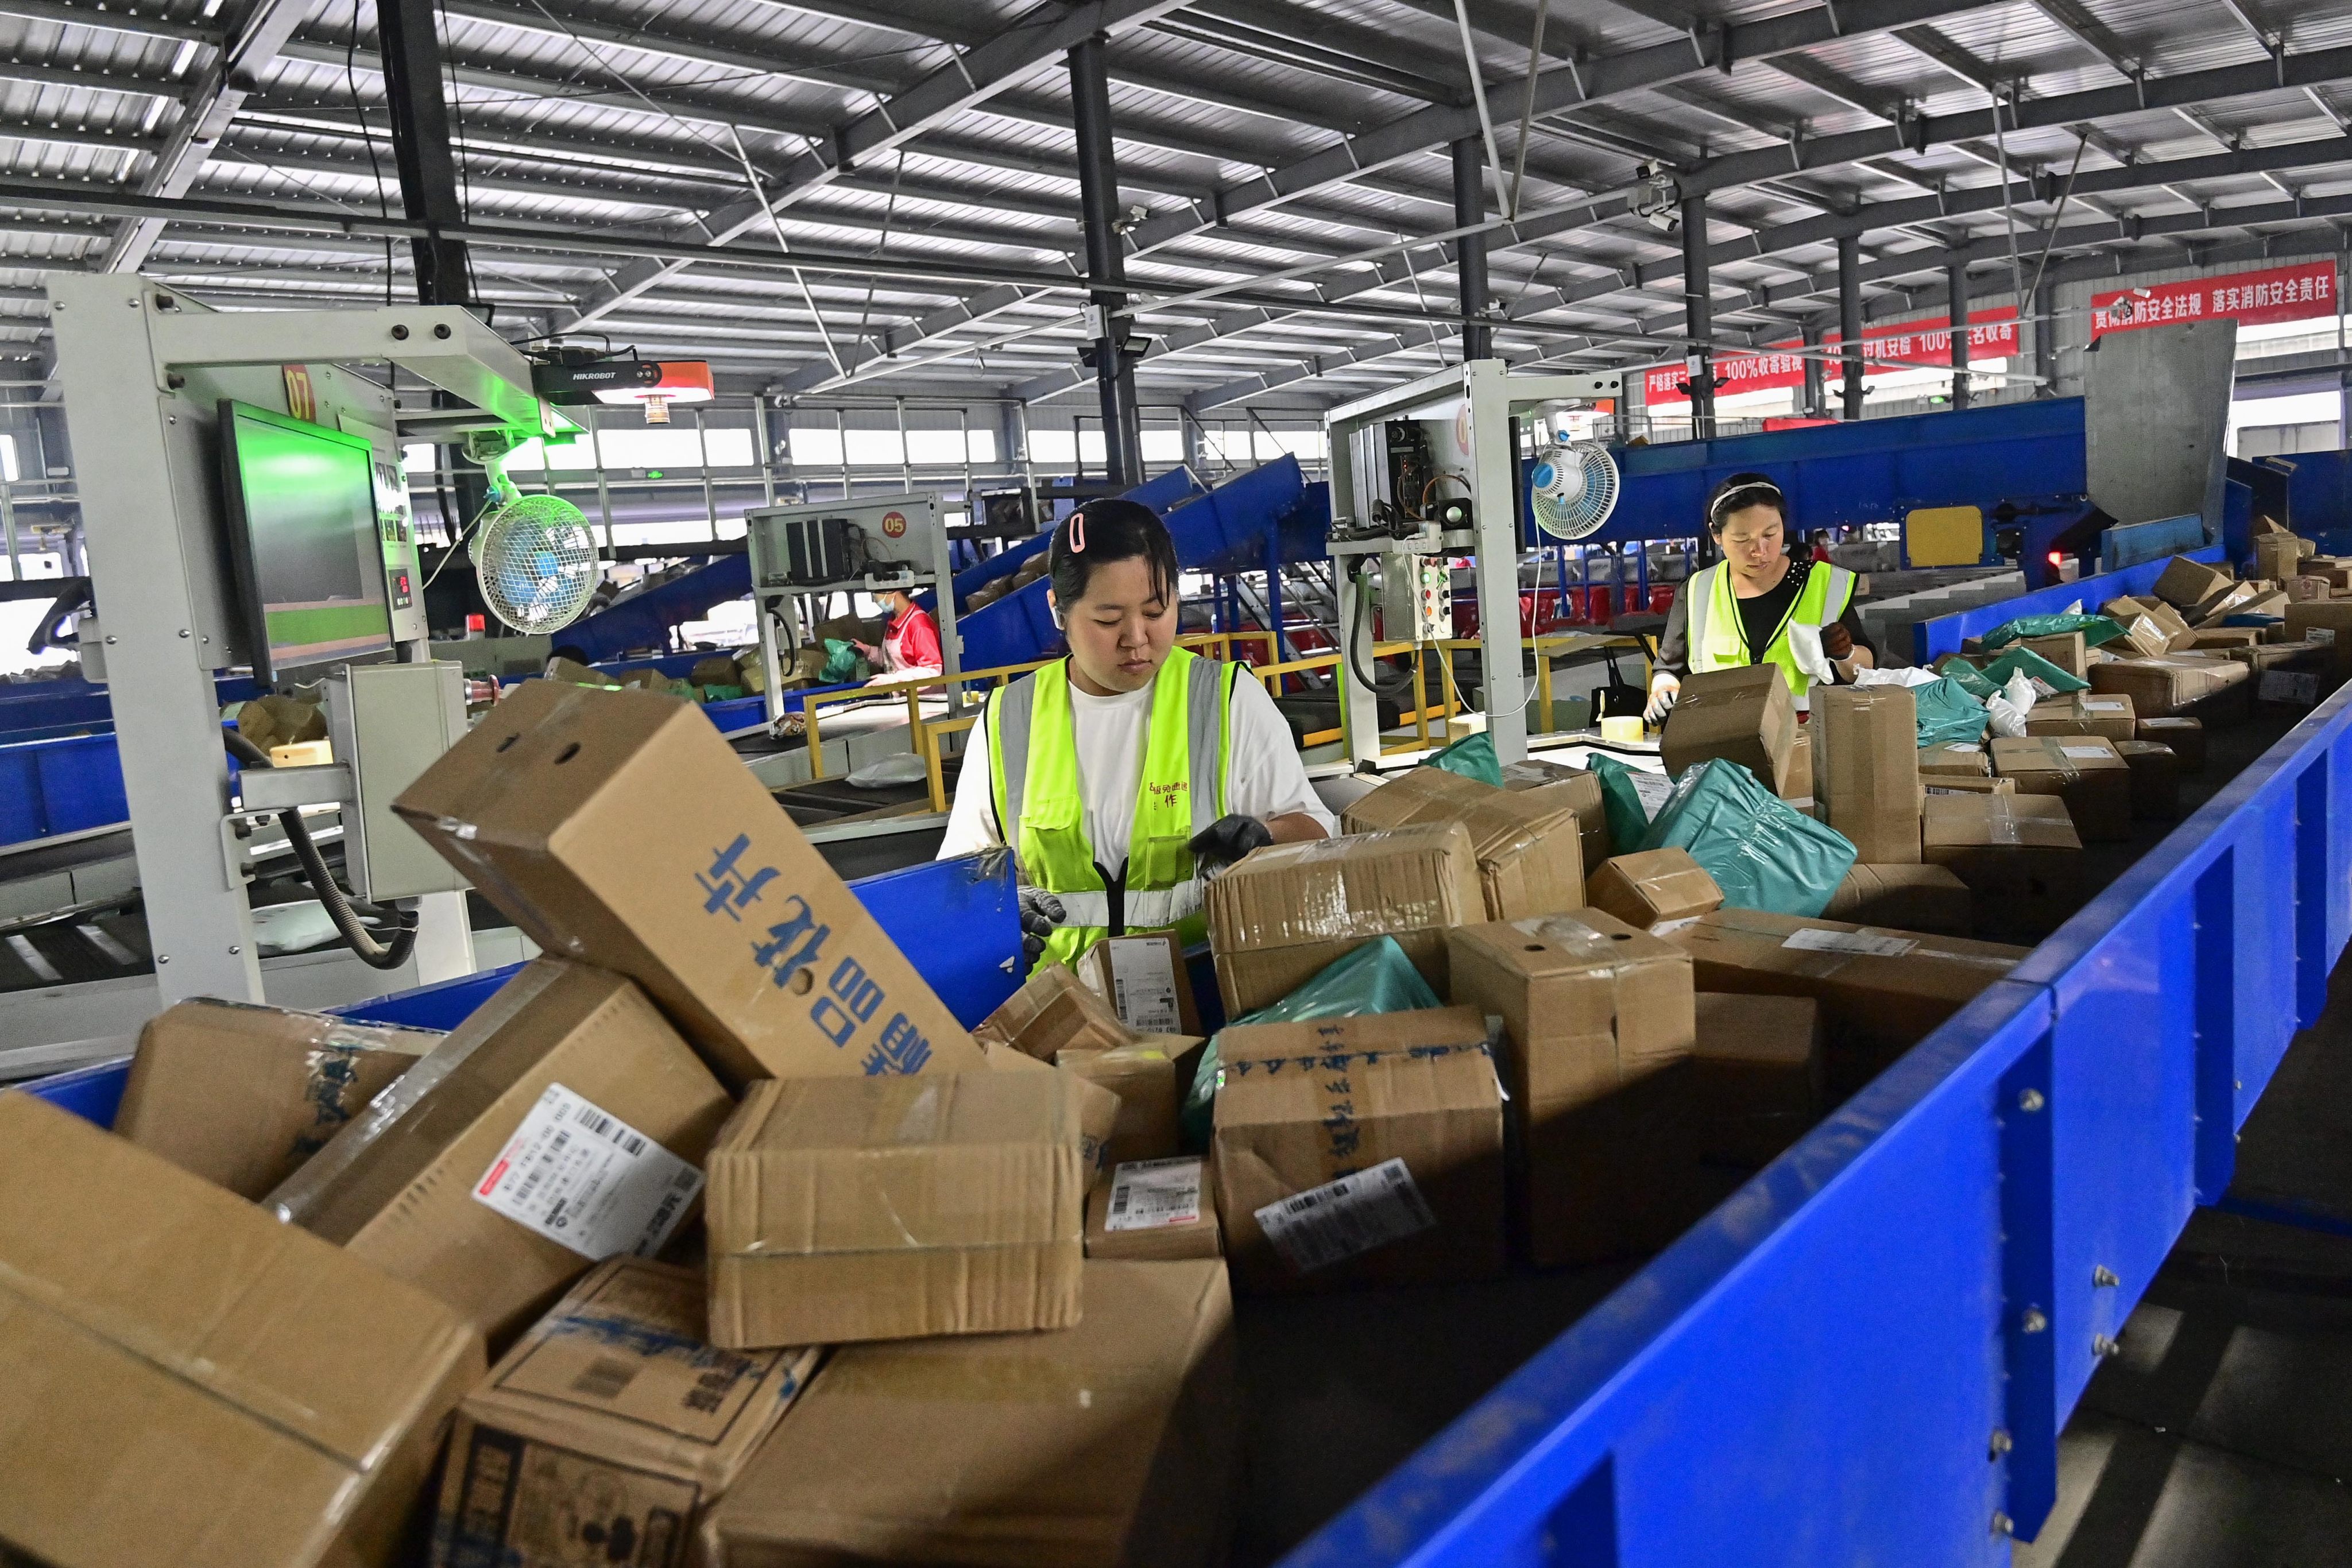 Creating consistent rules for the national flow of resources and goods has been named by China as a major priority in spurring domestic consumption. Photo: Getty Images